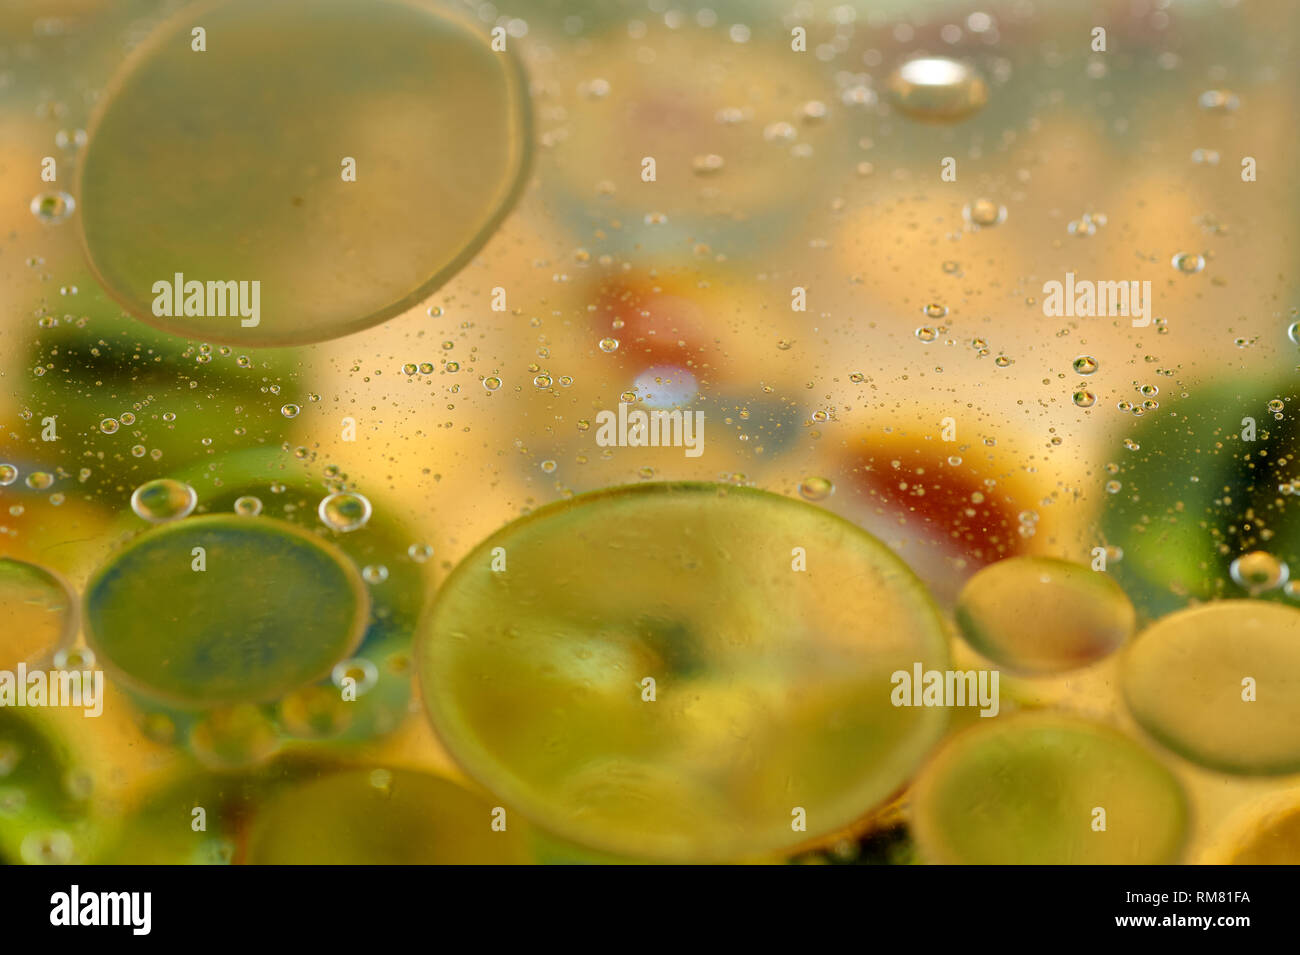 Download Floating In The Water Abstract Colorful Yellow Oil Drops Stock Photo Alamy Yellowimages Mockups